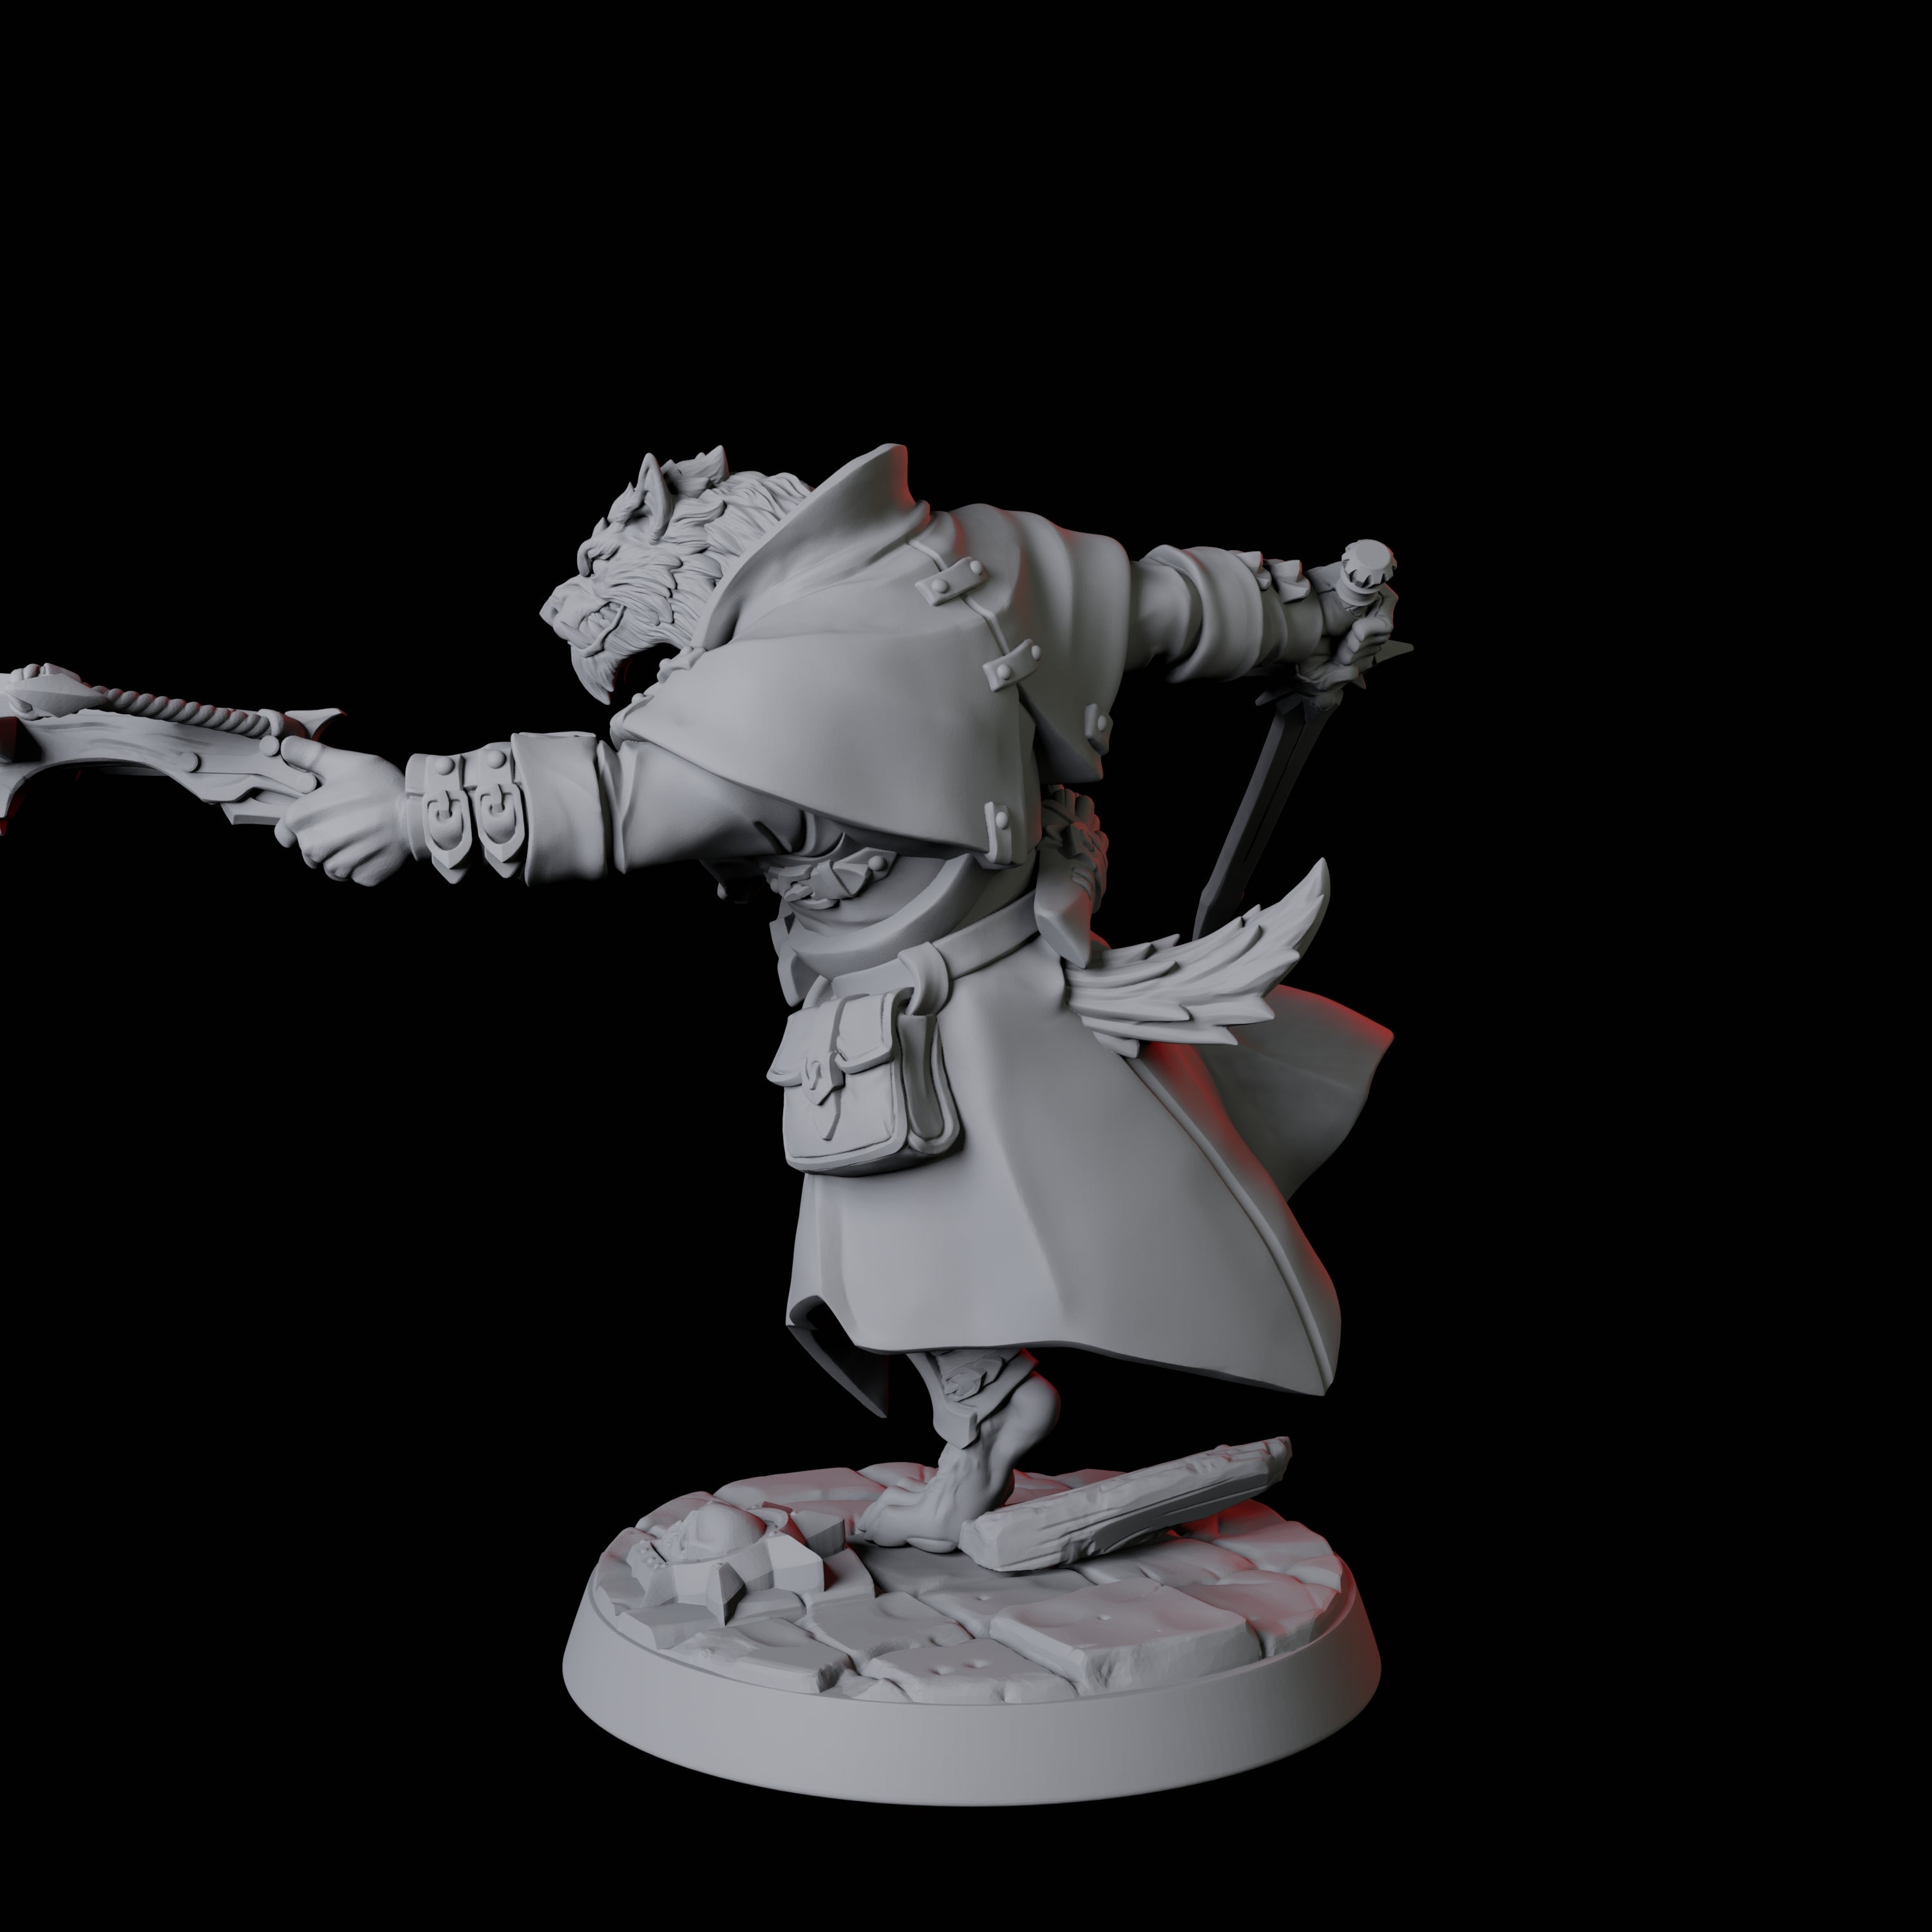 Werewolf Vampire Hunter A Miniature for Dungeons and Dragons, Pathfinder or other TTRPGs